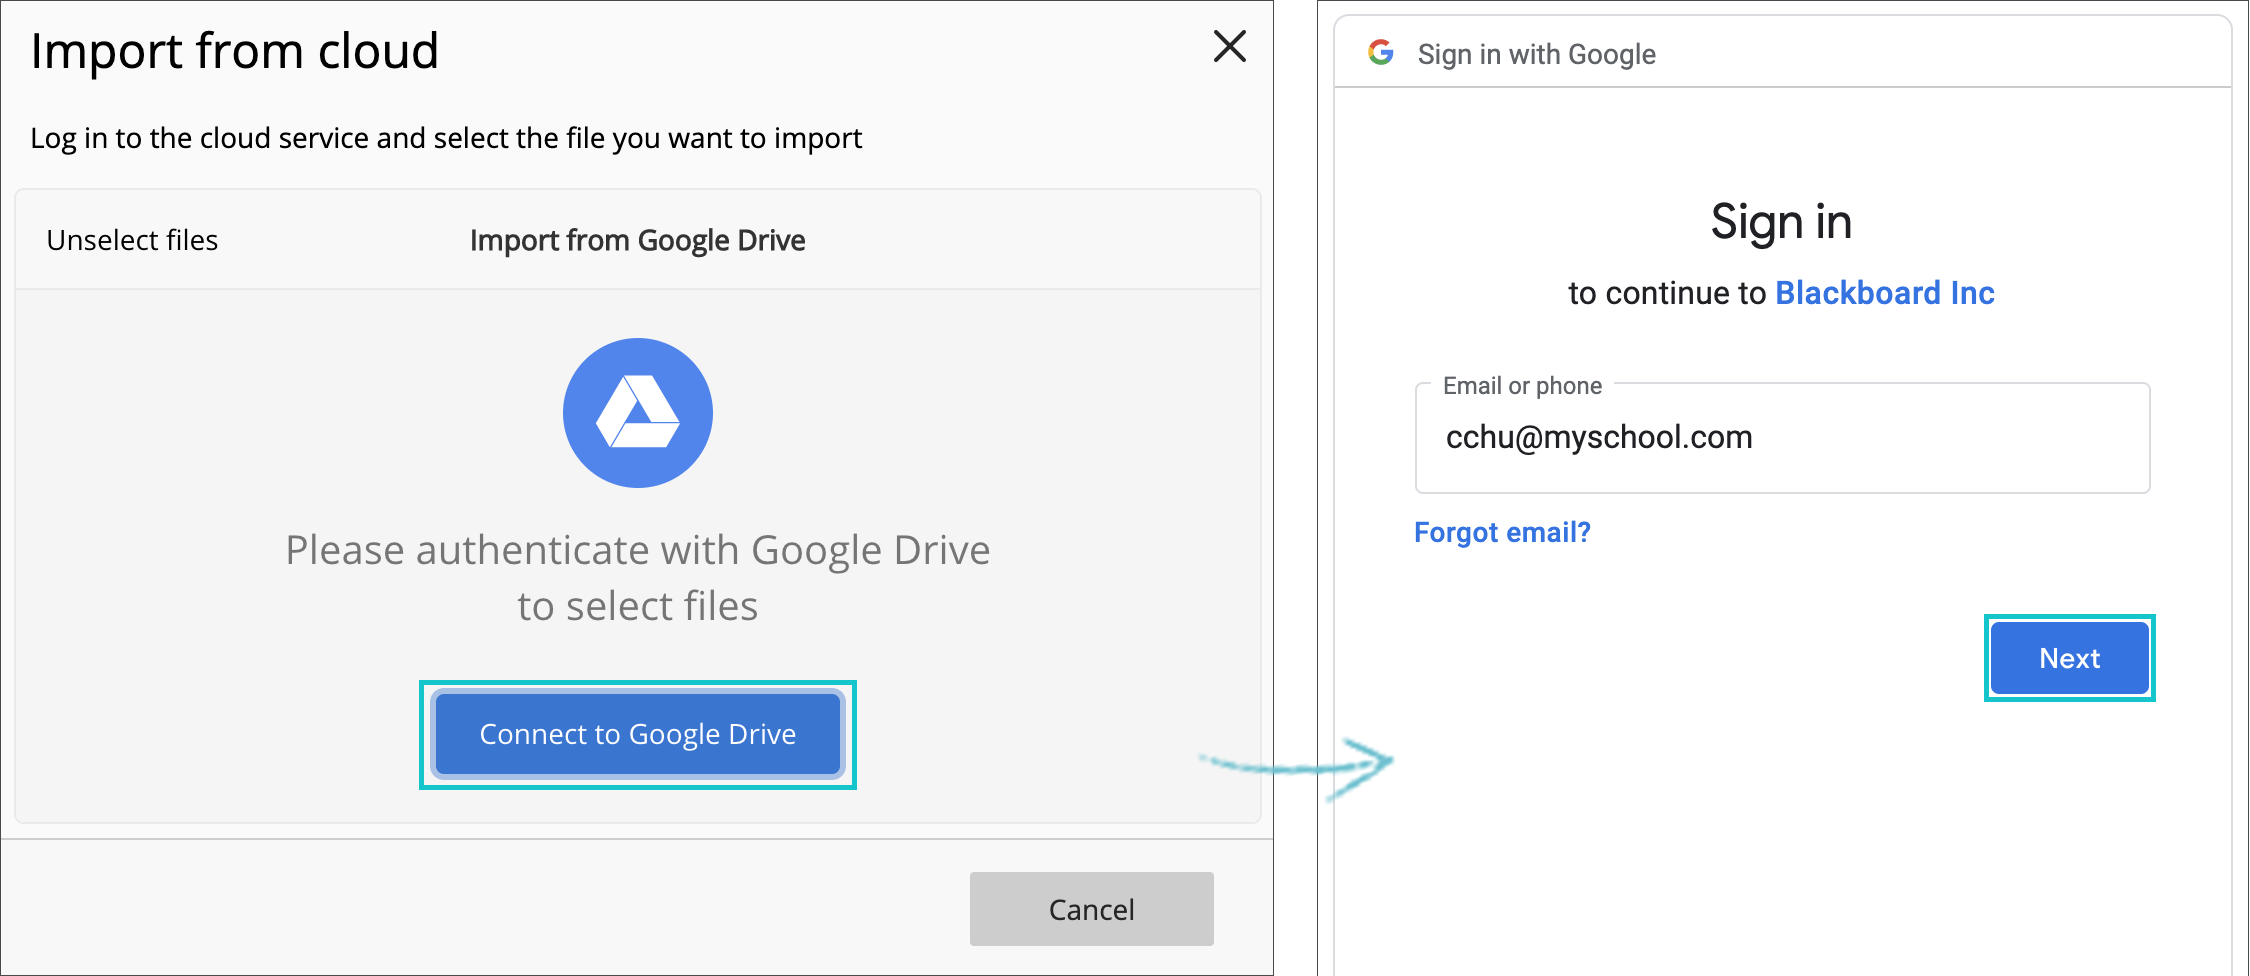 Learn ultra cloud storage allow access to Google drive